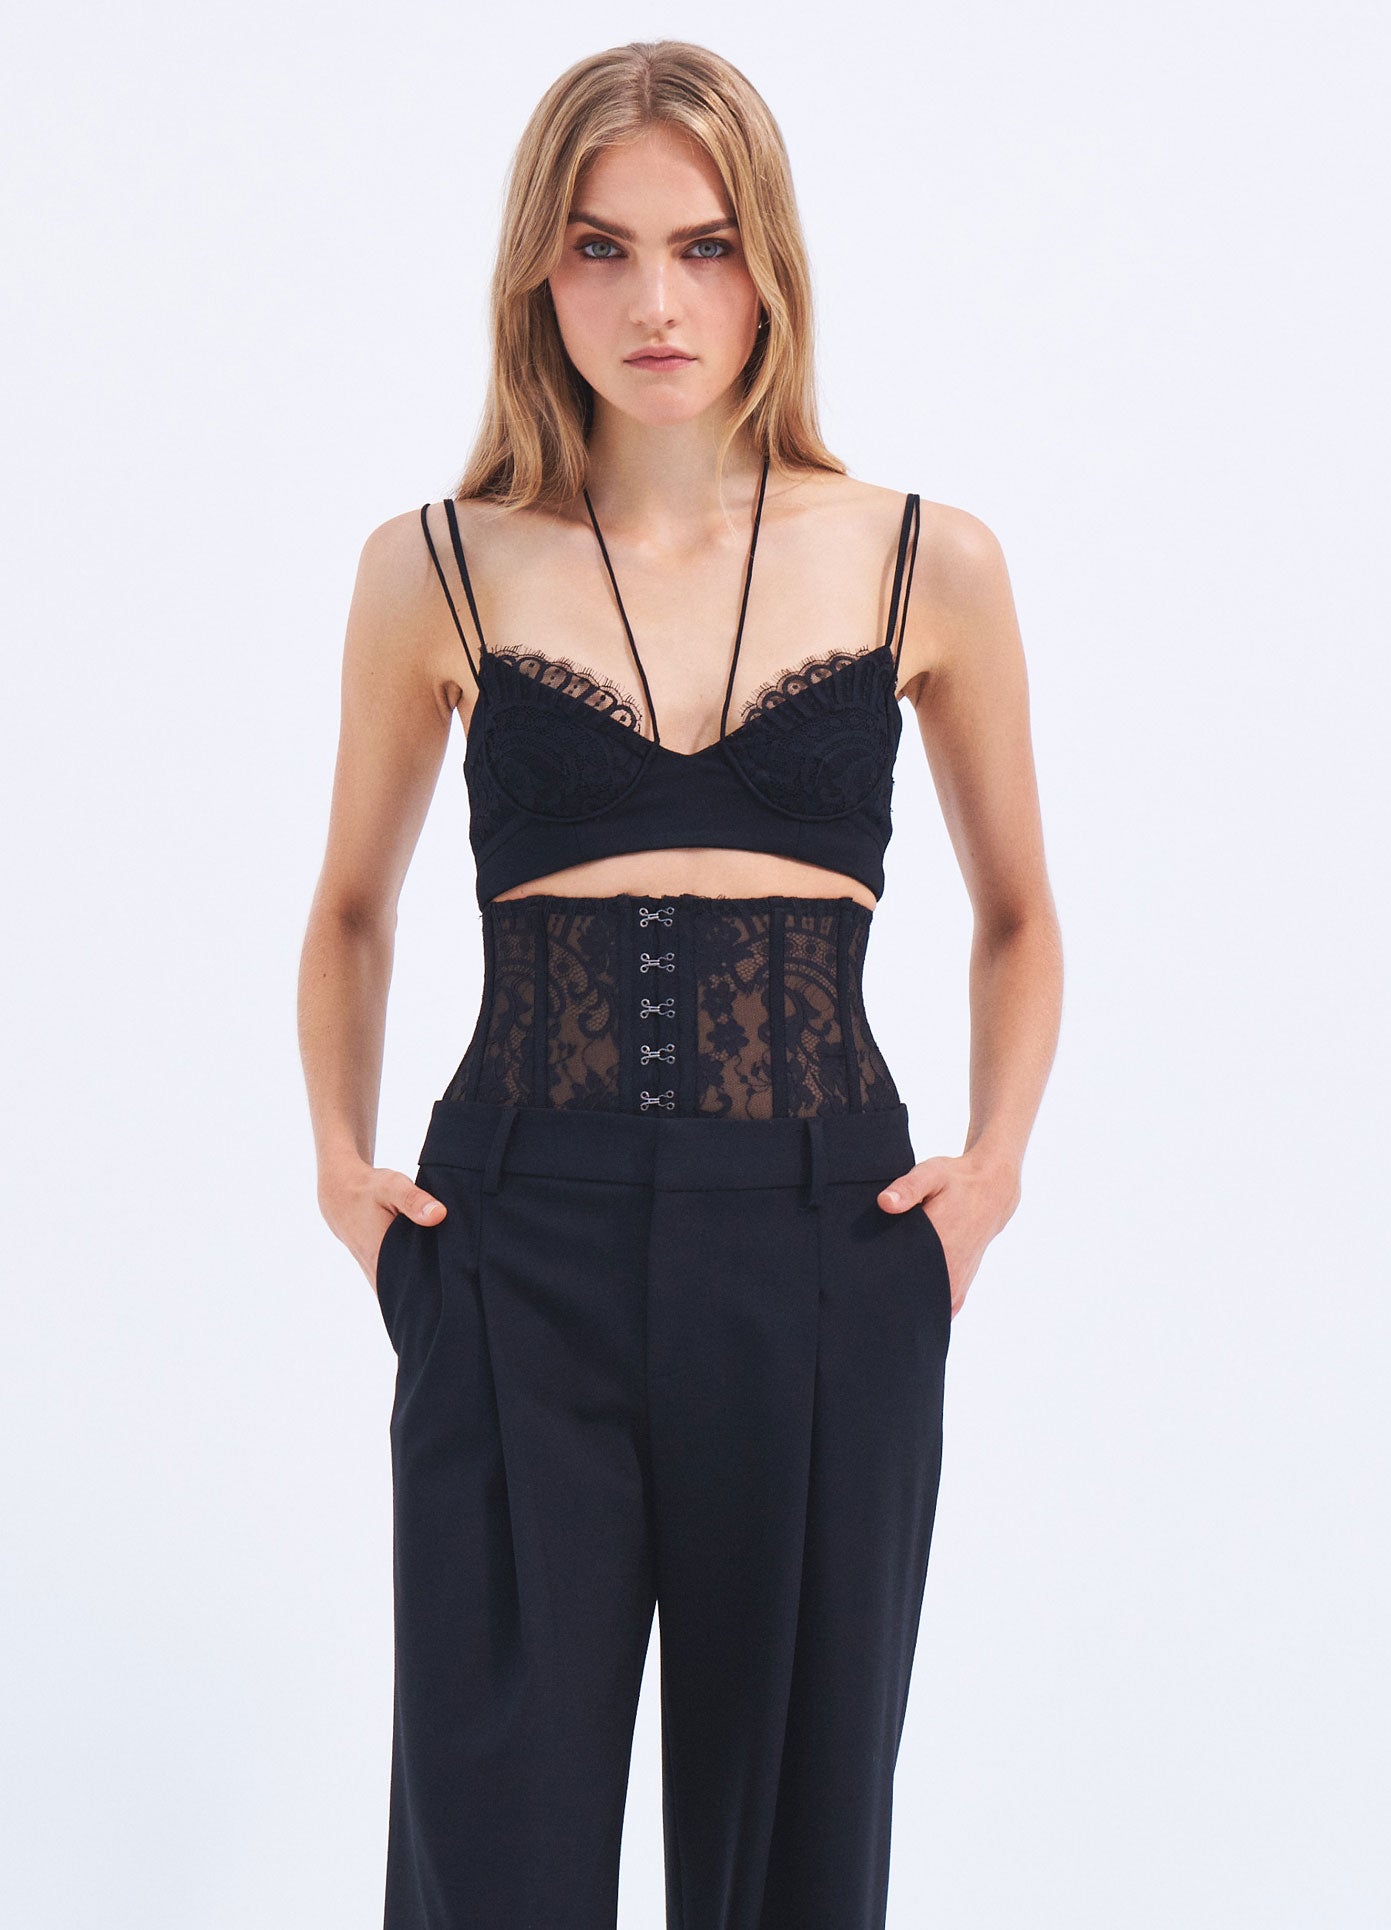 MONSE Spring 2024 Lace Tie Strap Bralette in Black on model front view